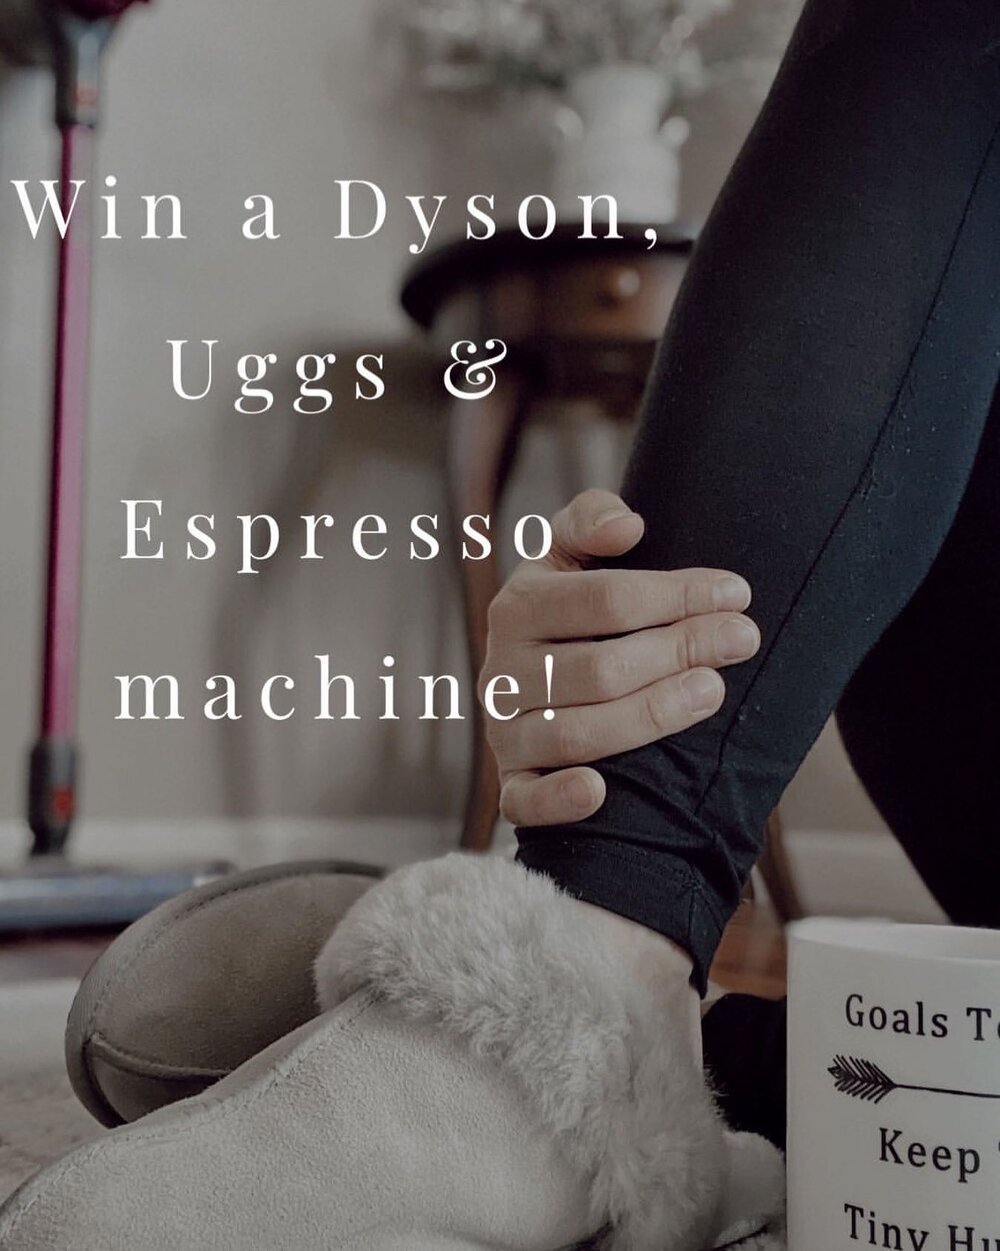 It&rsquo;s the perfect time of year to get cozy! Enter to win this amazing bundle including a Delonghi Espresso Maker, Uggs slippers AND a Dyson (or the cash value $500)!
It&rsquo;s super easy to enter!
_
1. FOLLOW ME and @modernmomgiveaways
2. FOLLO